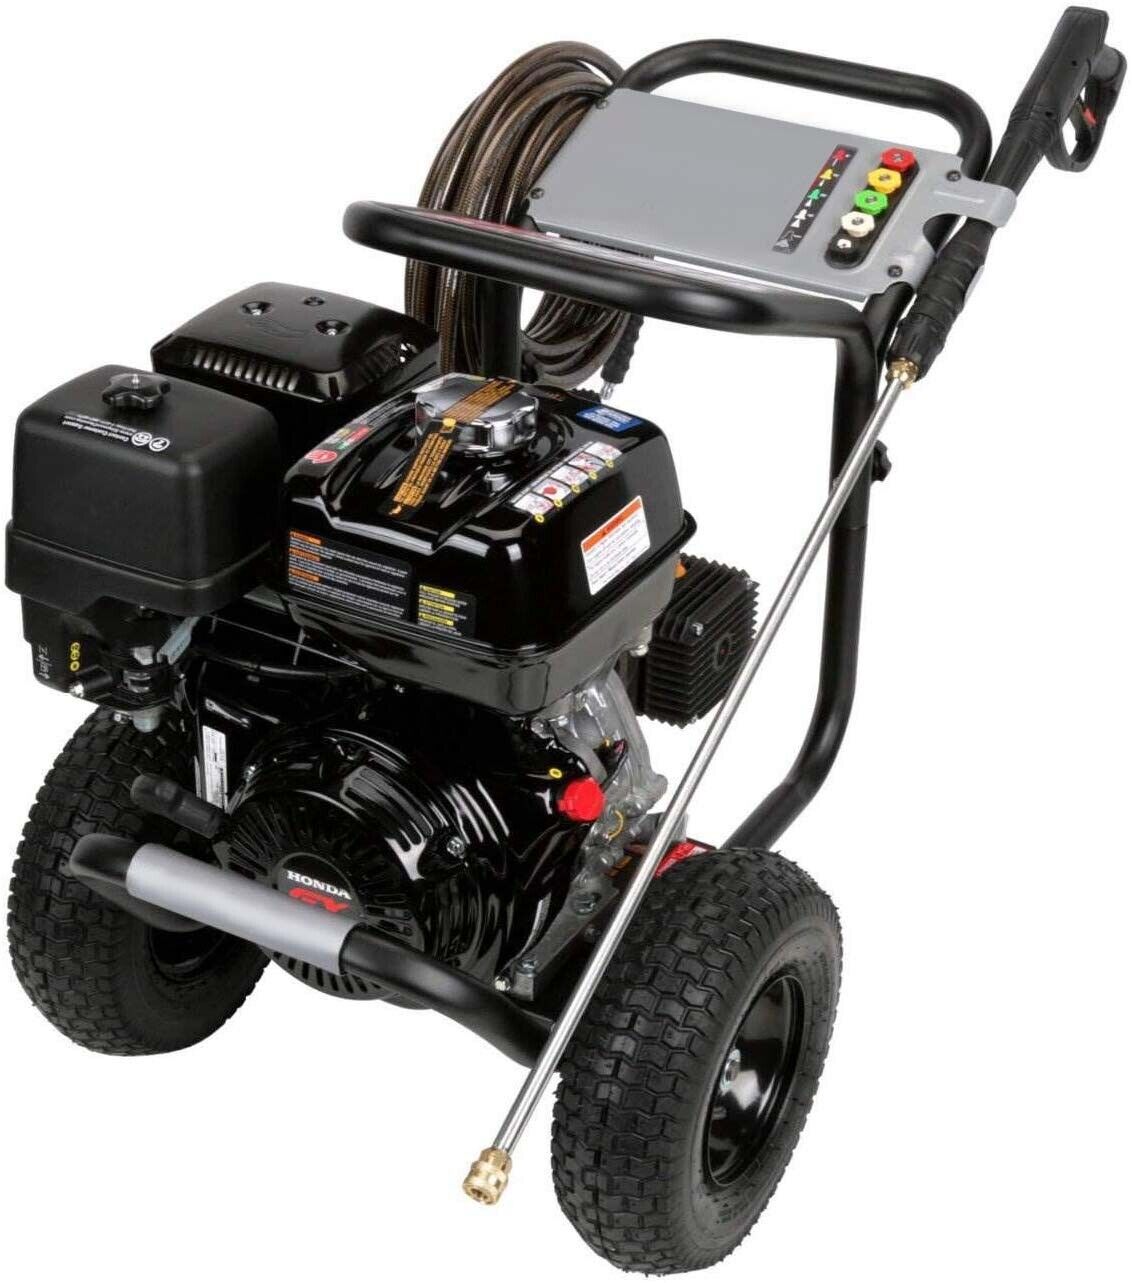 Gas Pressure Washer - Cold Water - 4200 PSI - 4 GPM - Honda Engine - AAA Pump